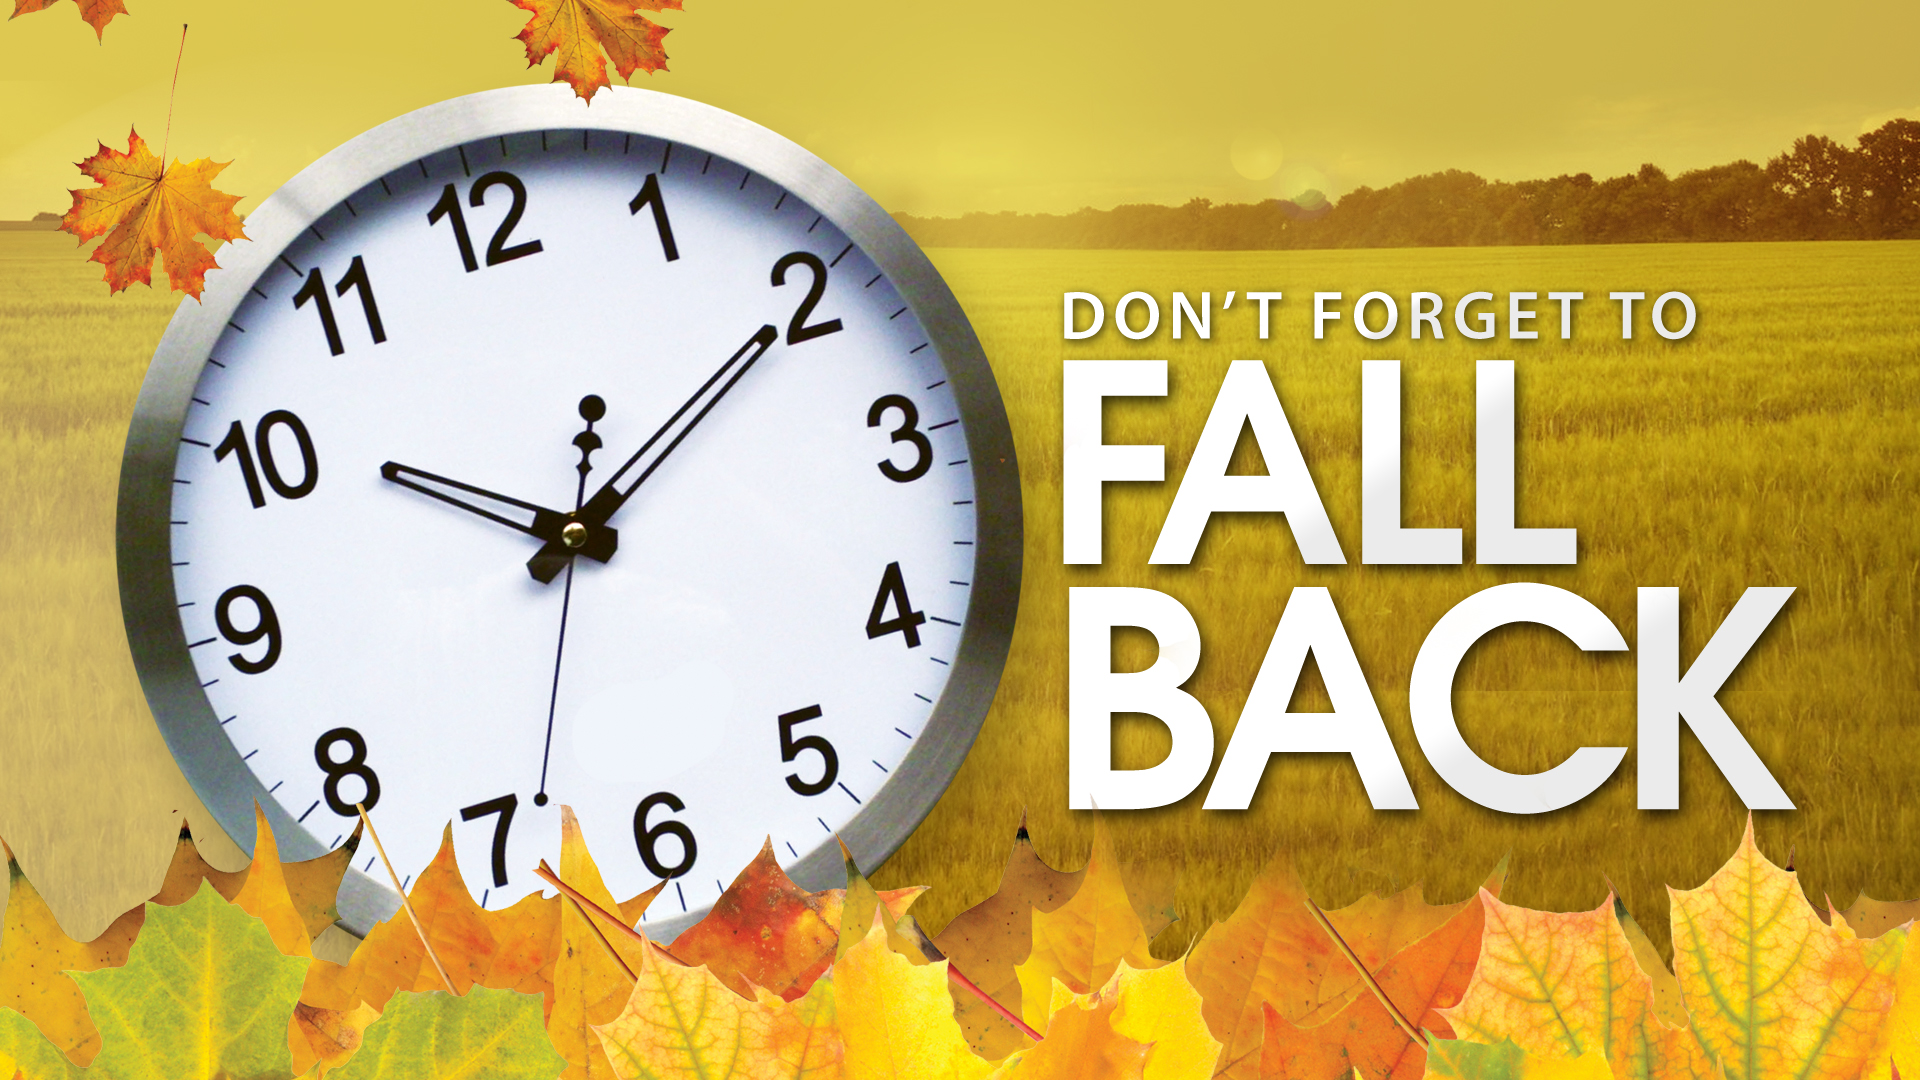 Rossview Middle School Post: Daylights Saving Time (Set Clocks Back 1 Hour)